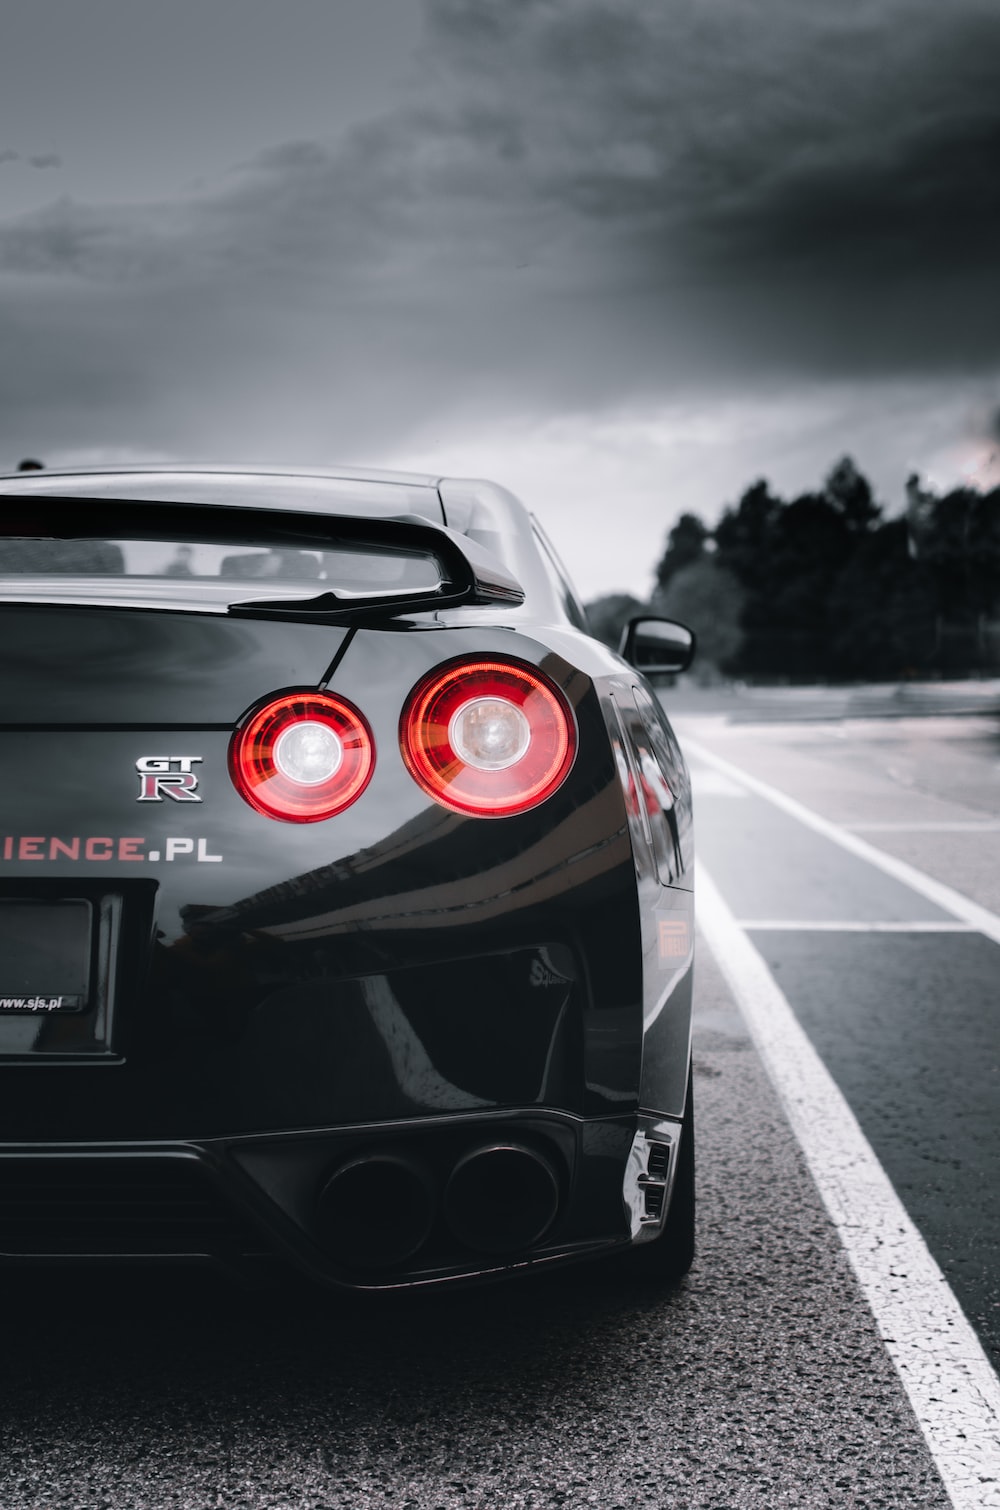 Nissan Gtr Picture. Download Free Image